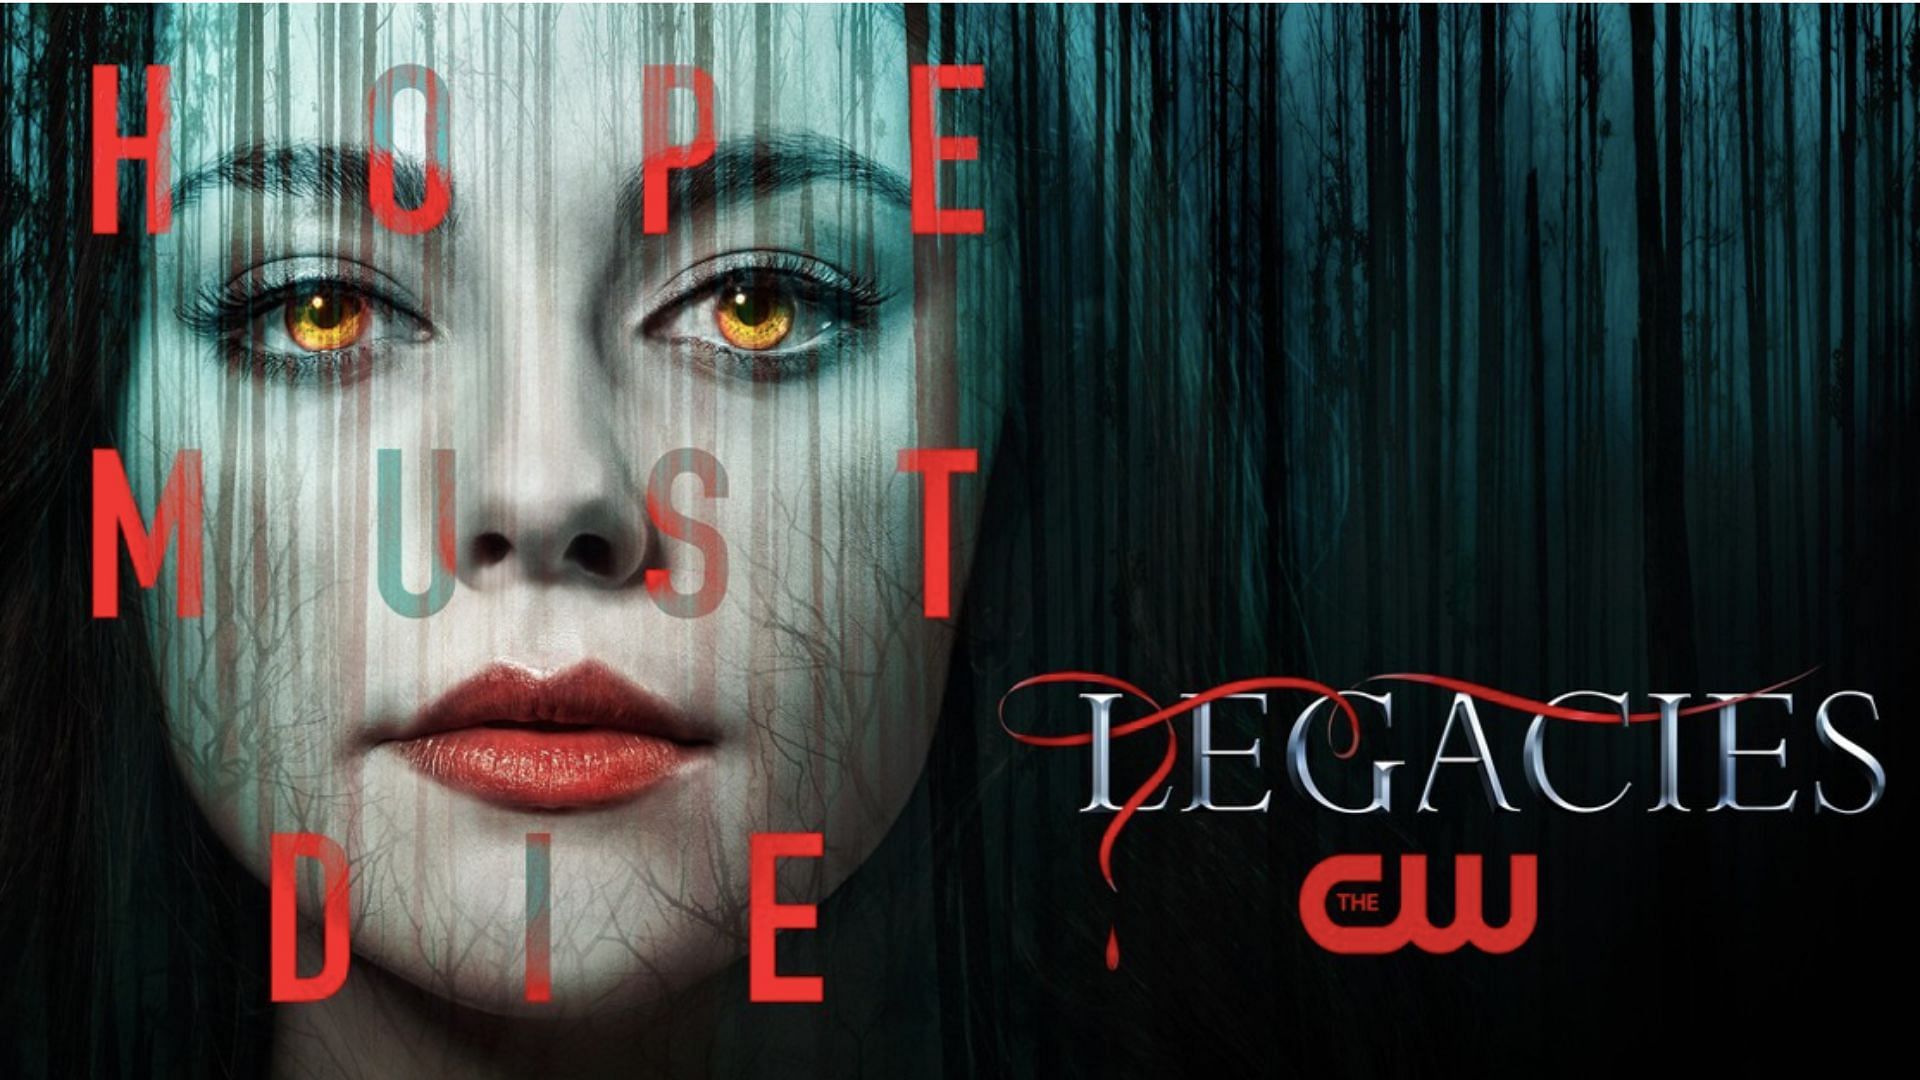 Official poster for Legacies (Image via Rotten Tomatoes)